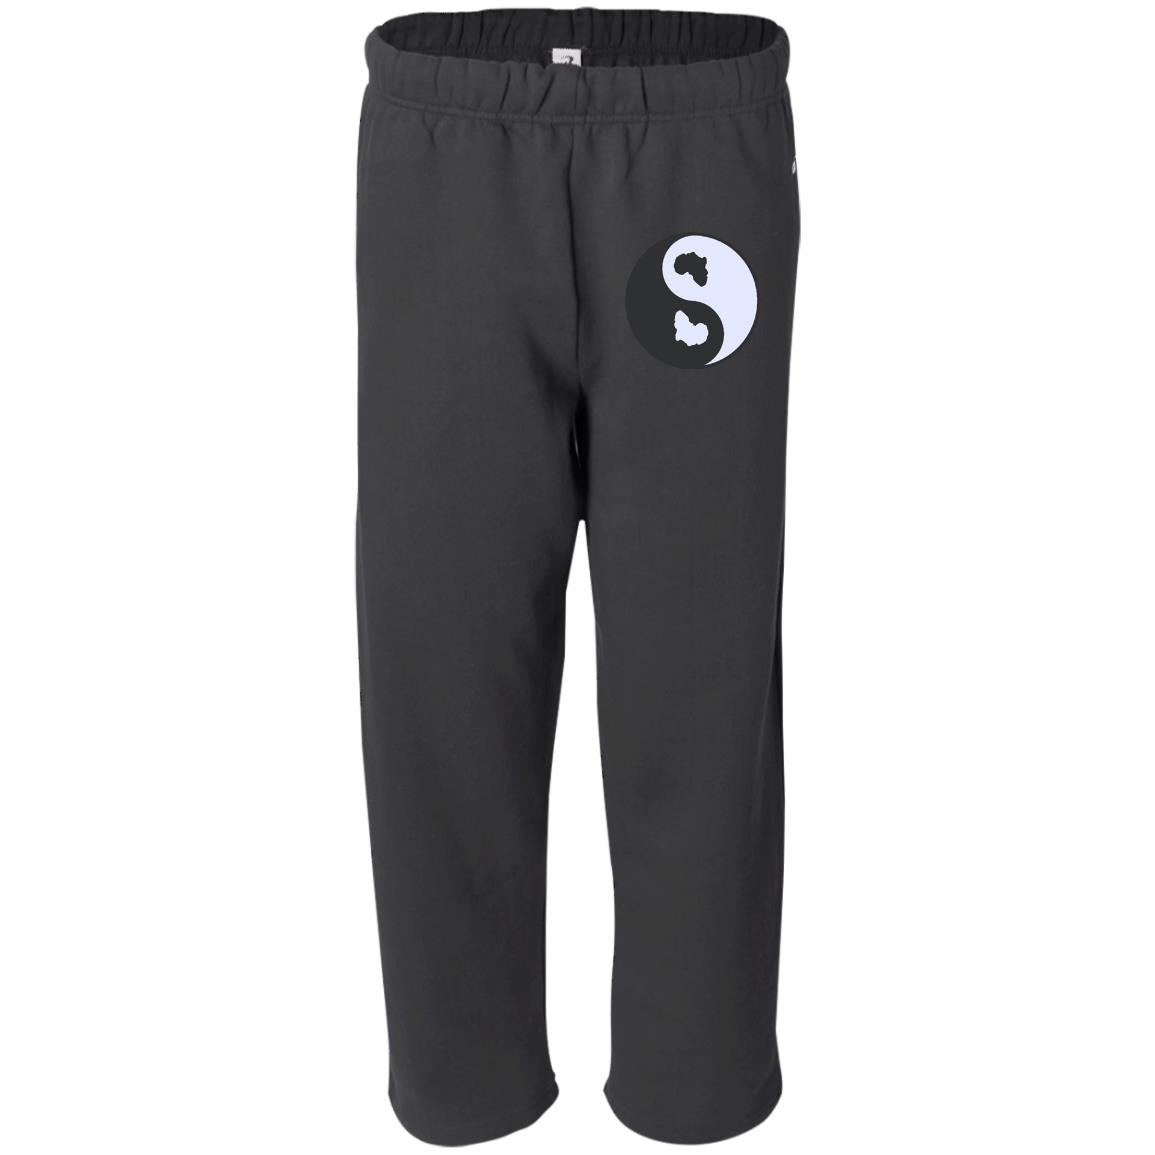 Ying Yang KMT Open Bottom Sweatpant with Pockets